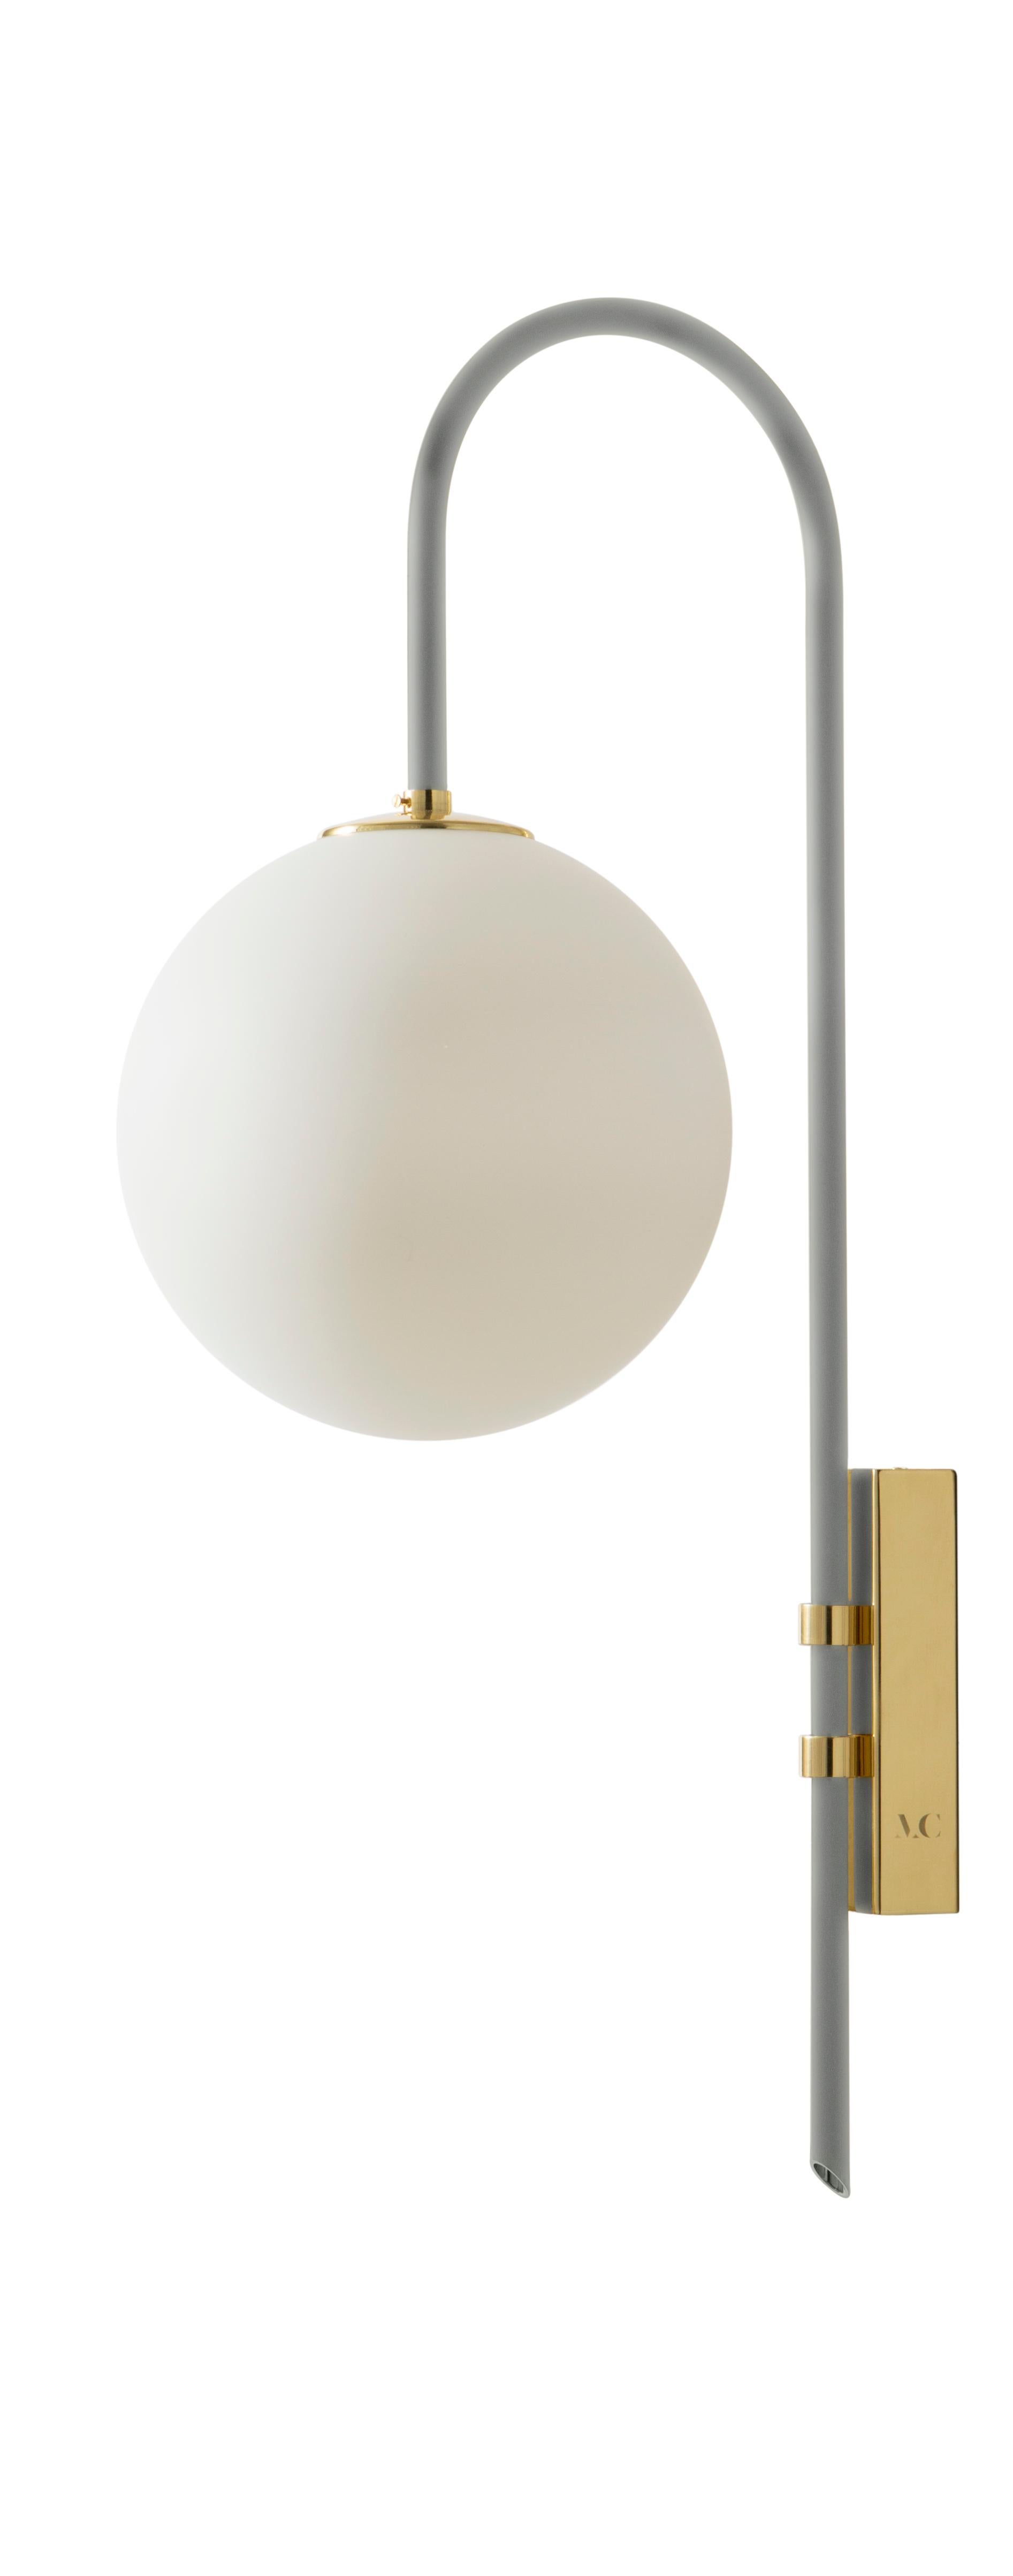 Papyrus brass wall lamp 06 by Magic Circus Editions.
Dimensions: H 77 x W 25 x D 36.5 cm.
Materials: Smooth brass, mouth blown glass.
Sphere dimensions: 25 cm.

Available finishes: brass, nickel.
All our lamps can be wired according to each